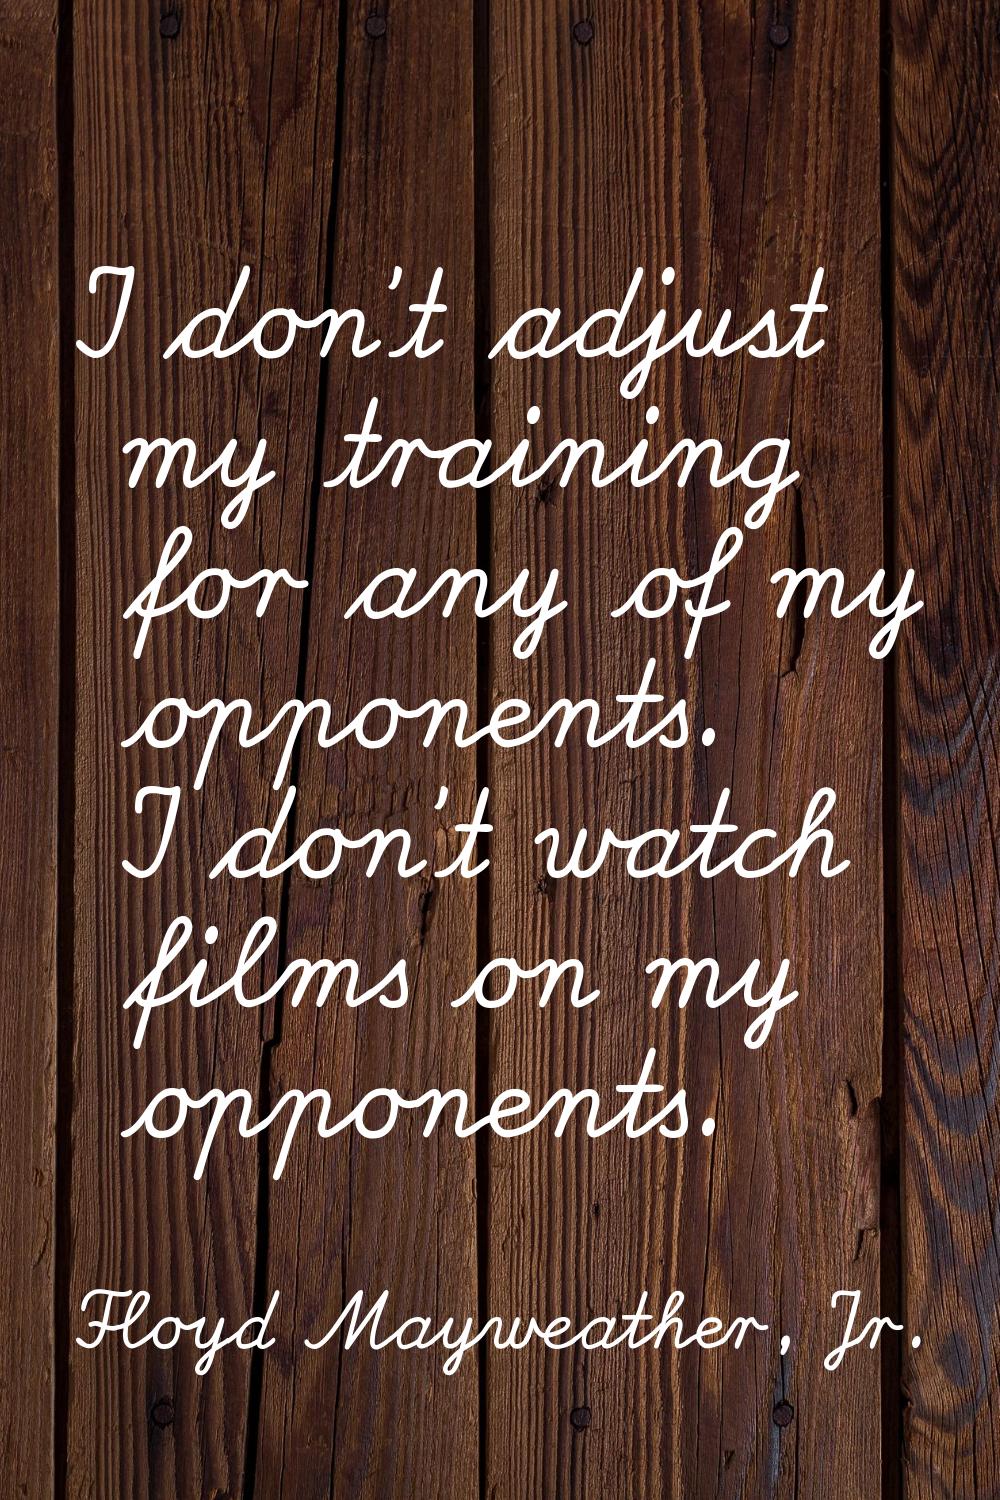 I don't adjust my training for any of my opponents. I don't watch films on my opponents.